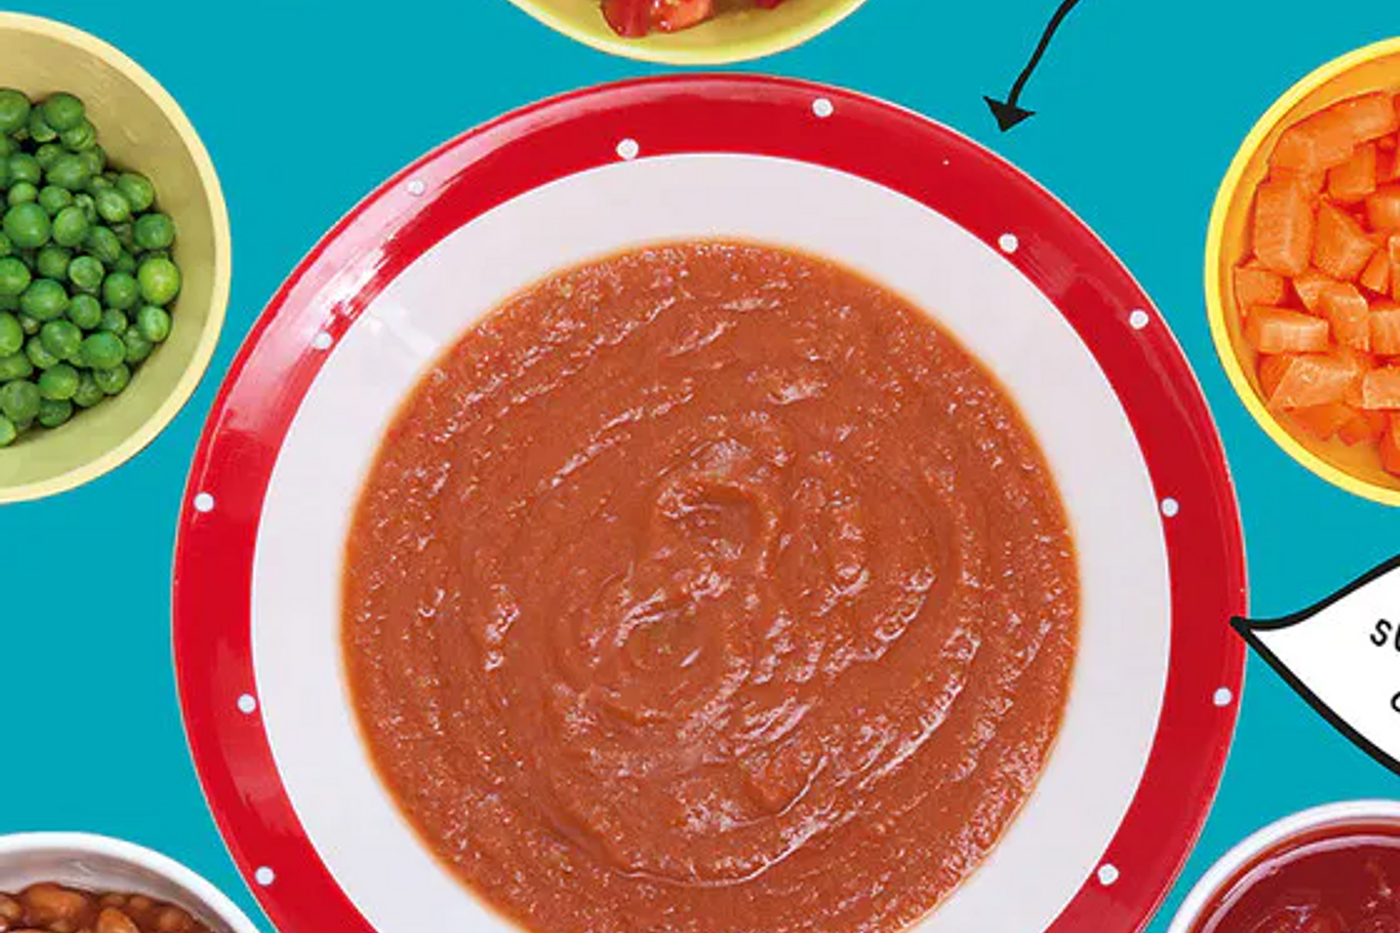 Clever tomato sauce